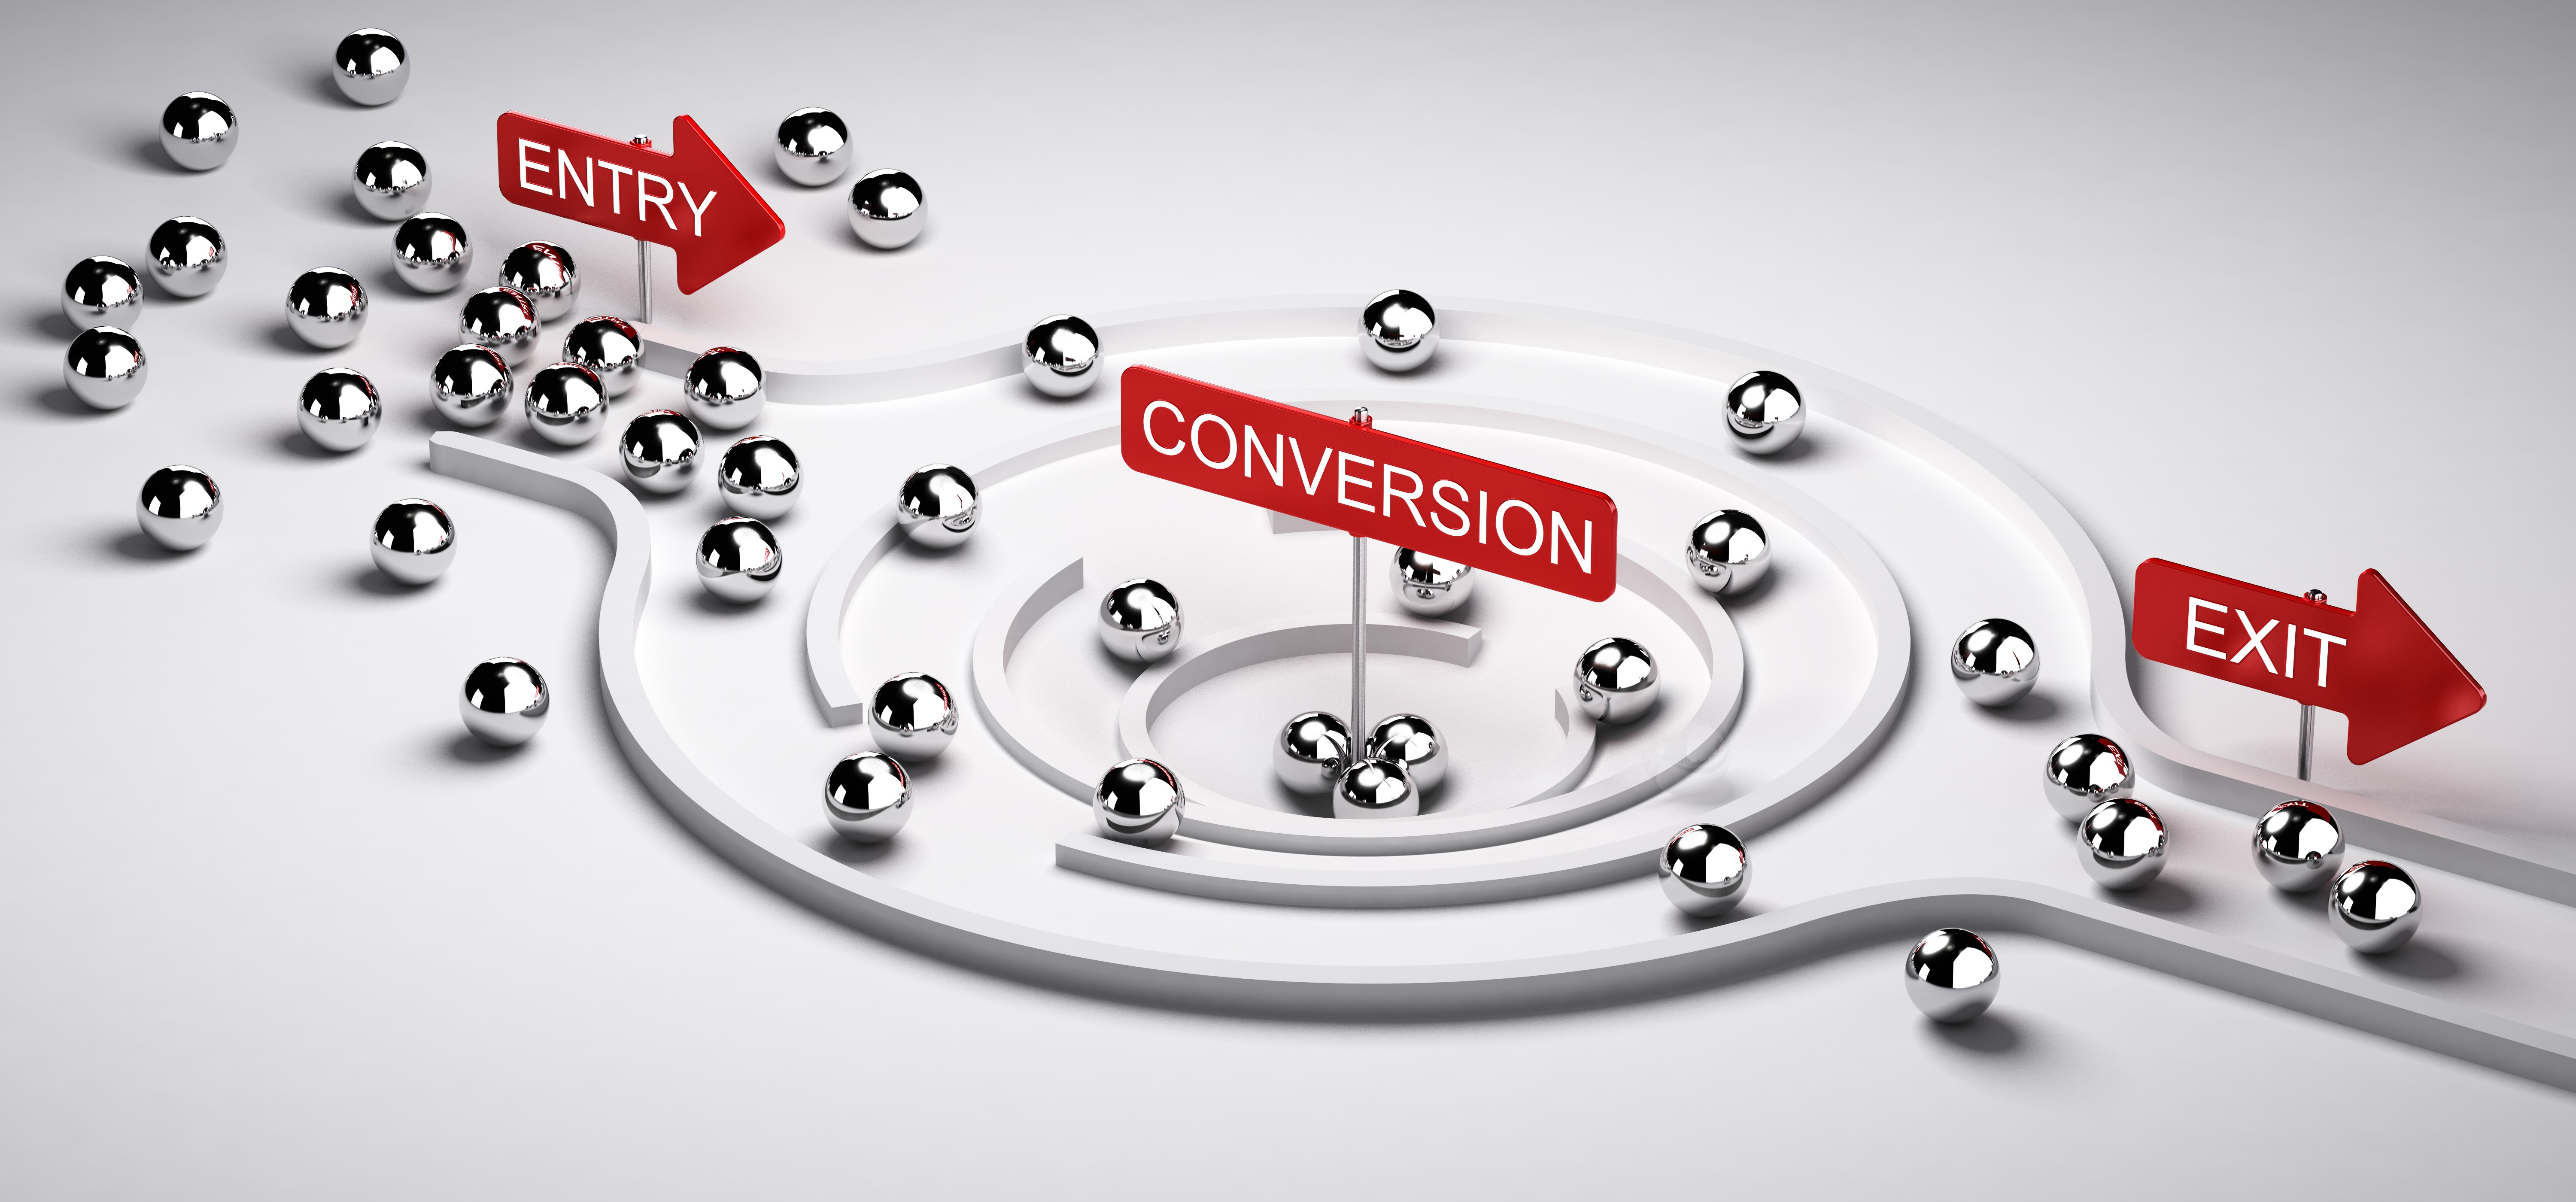 The ABC’s of Marketing: Always Be Converting